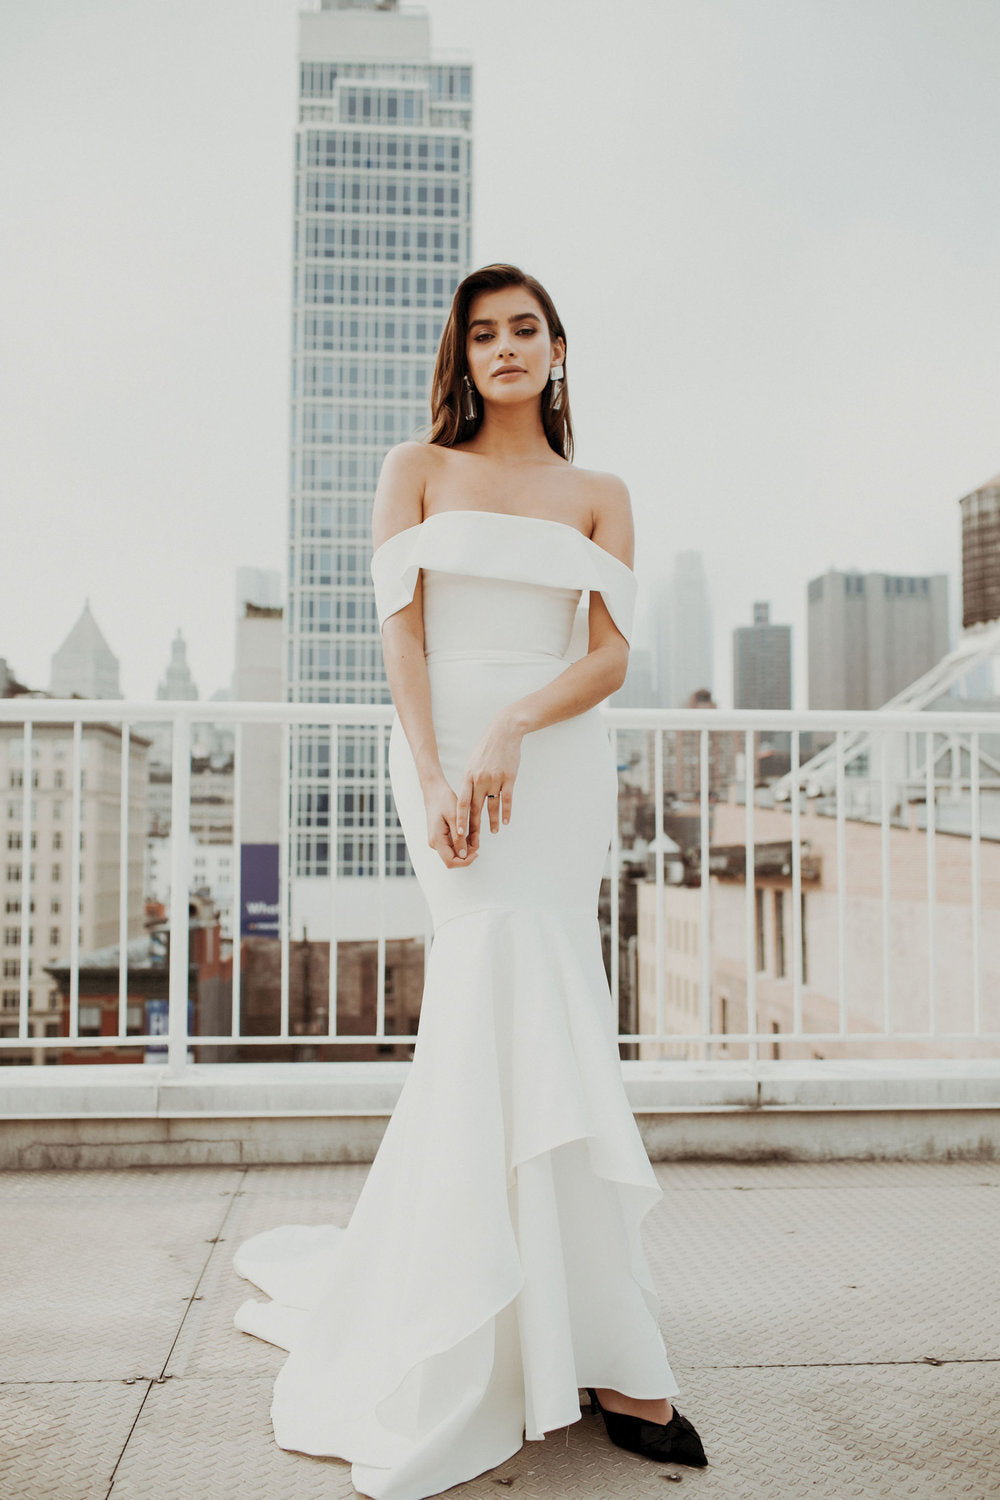 What Alterations are Possible on a Wedding Dress?